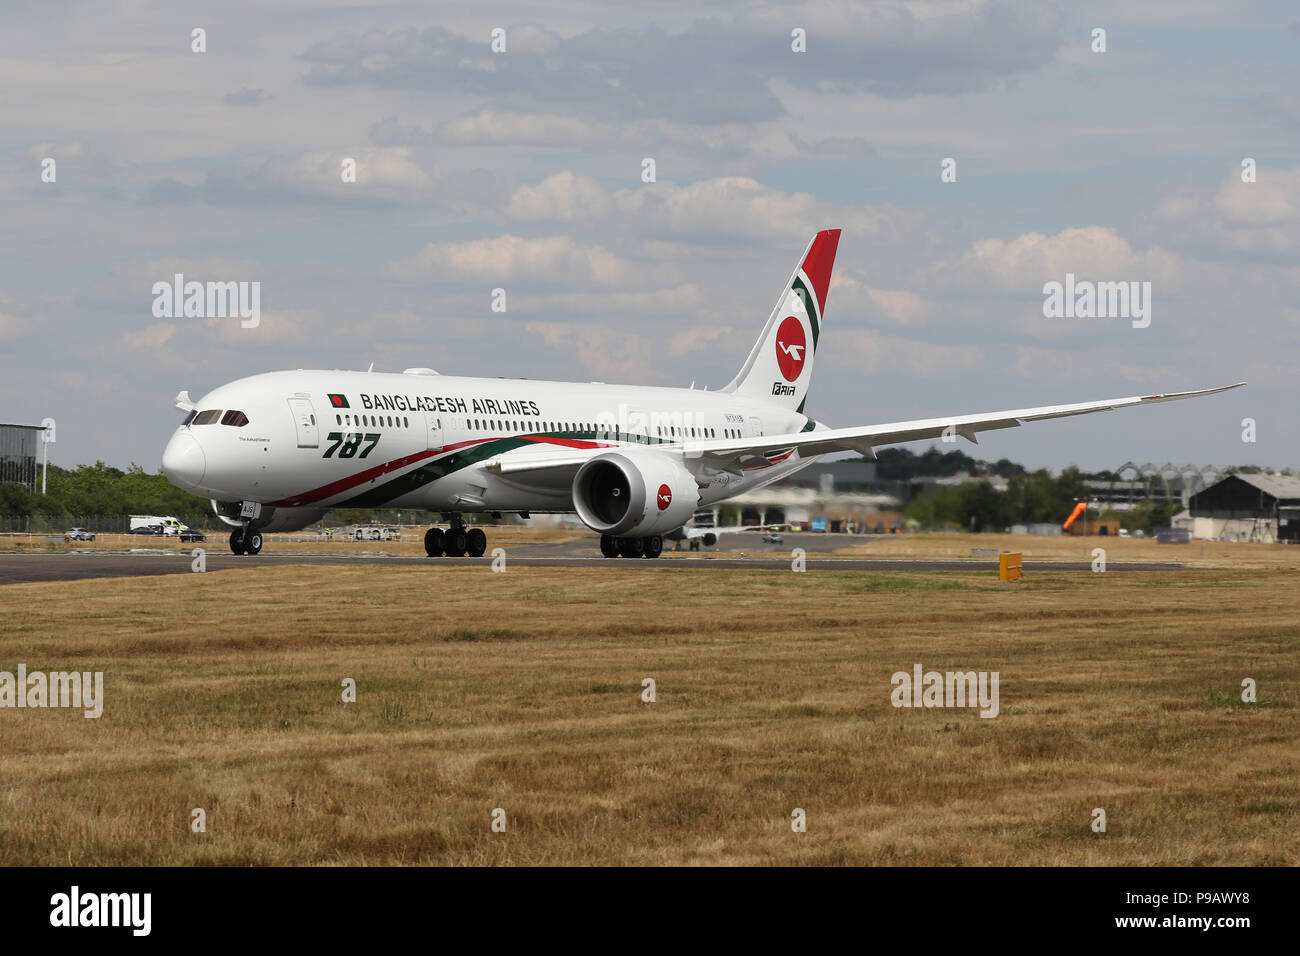 Farnborough, UK. 16th July 2018. A Boeing 787-800 of Bangladesh Airlines Biman takes off to perform its display on the opening day of the 2018 Farnborough International Airshow, one of the biggest aviation trade and industry events in the world, held in the UK. Credit: James Hancock/Alamy Live News Stock Photo